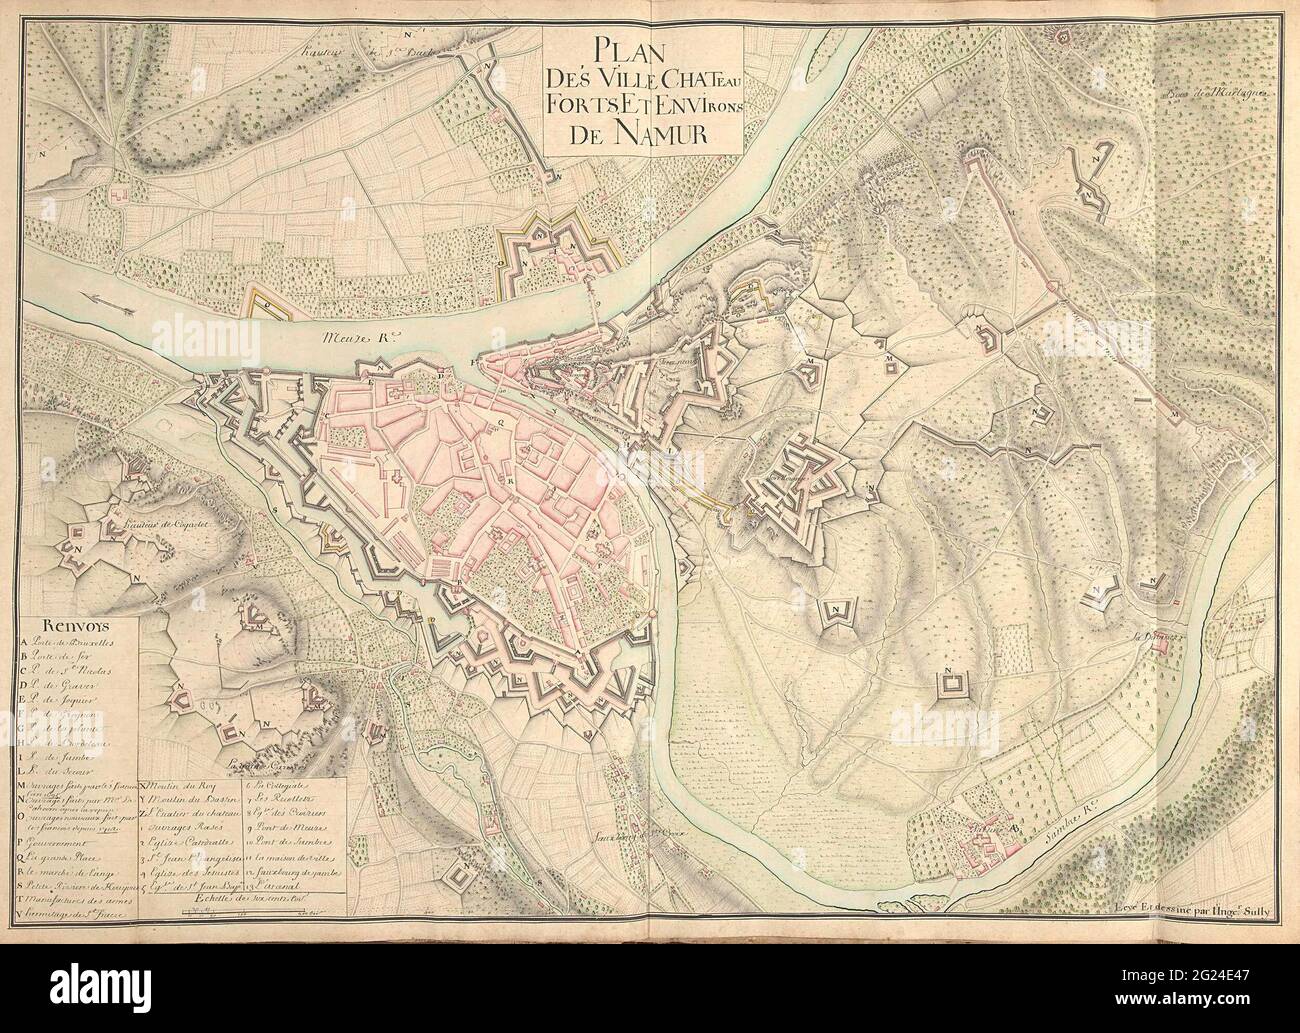 Map of Namur, ca. 1701-1715; Plan des Ville Chateau Forts, et Environs de Namur. Map of the reinforcements to the city took with the castle, ca. 1701-1715. At the bottom left of the legend A-Z and 1-13 in French. Part of a collection of signed plans of reinforced places in the Netherlands and surrounding countries at the time of the Spanish Succession War (Part B). Stock Photo